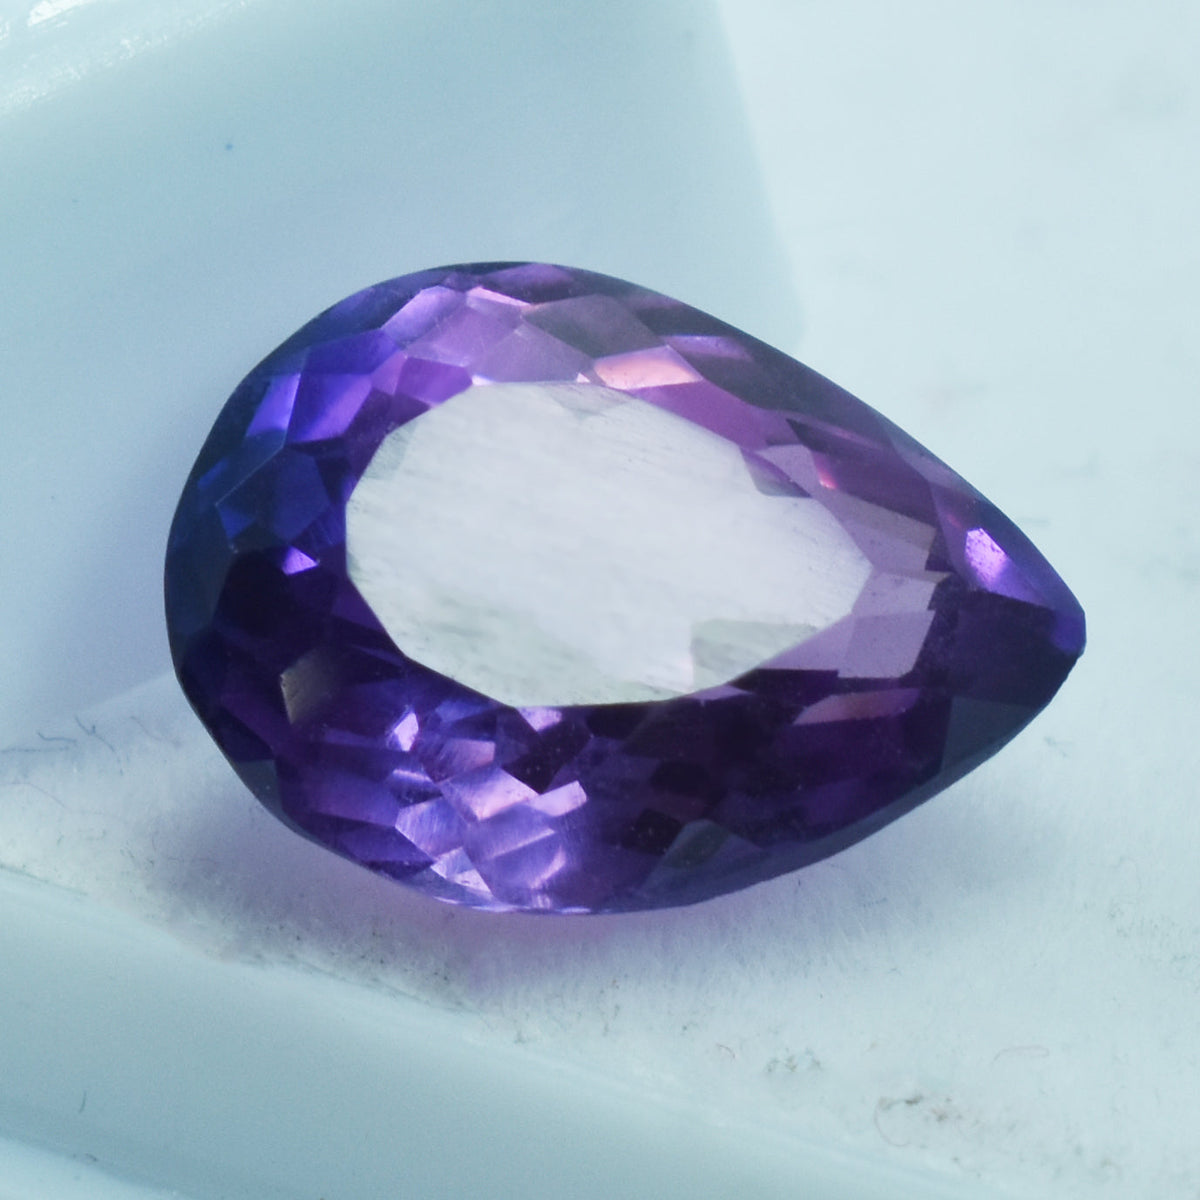 Extremely Rare Purple Color Change Sapphire 7.95 Carat Pear Shape Certified Natural Loose Gemstone | Free Delivery Free Gift | Best Offer